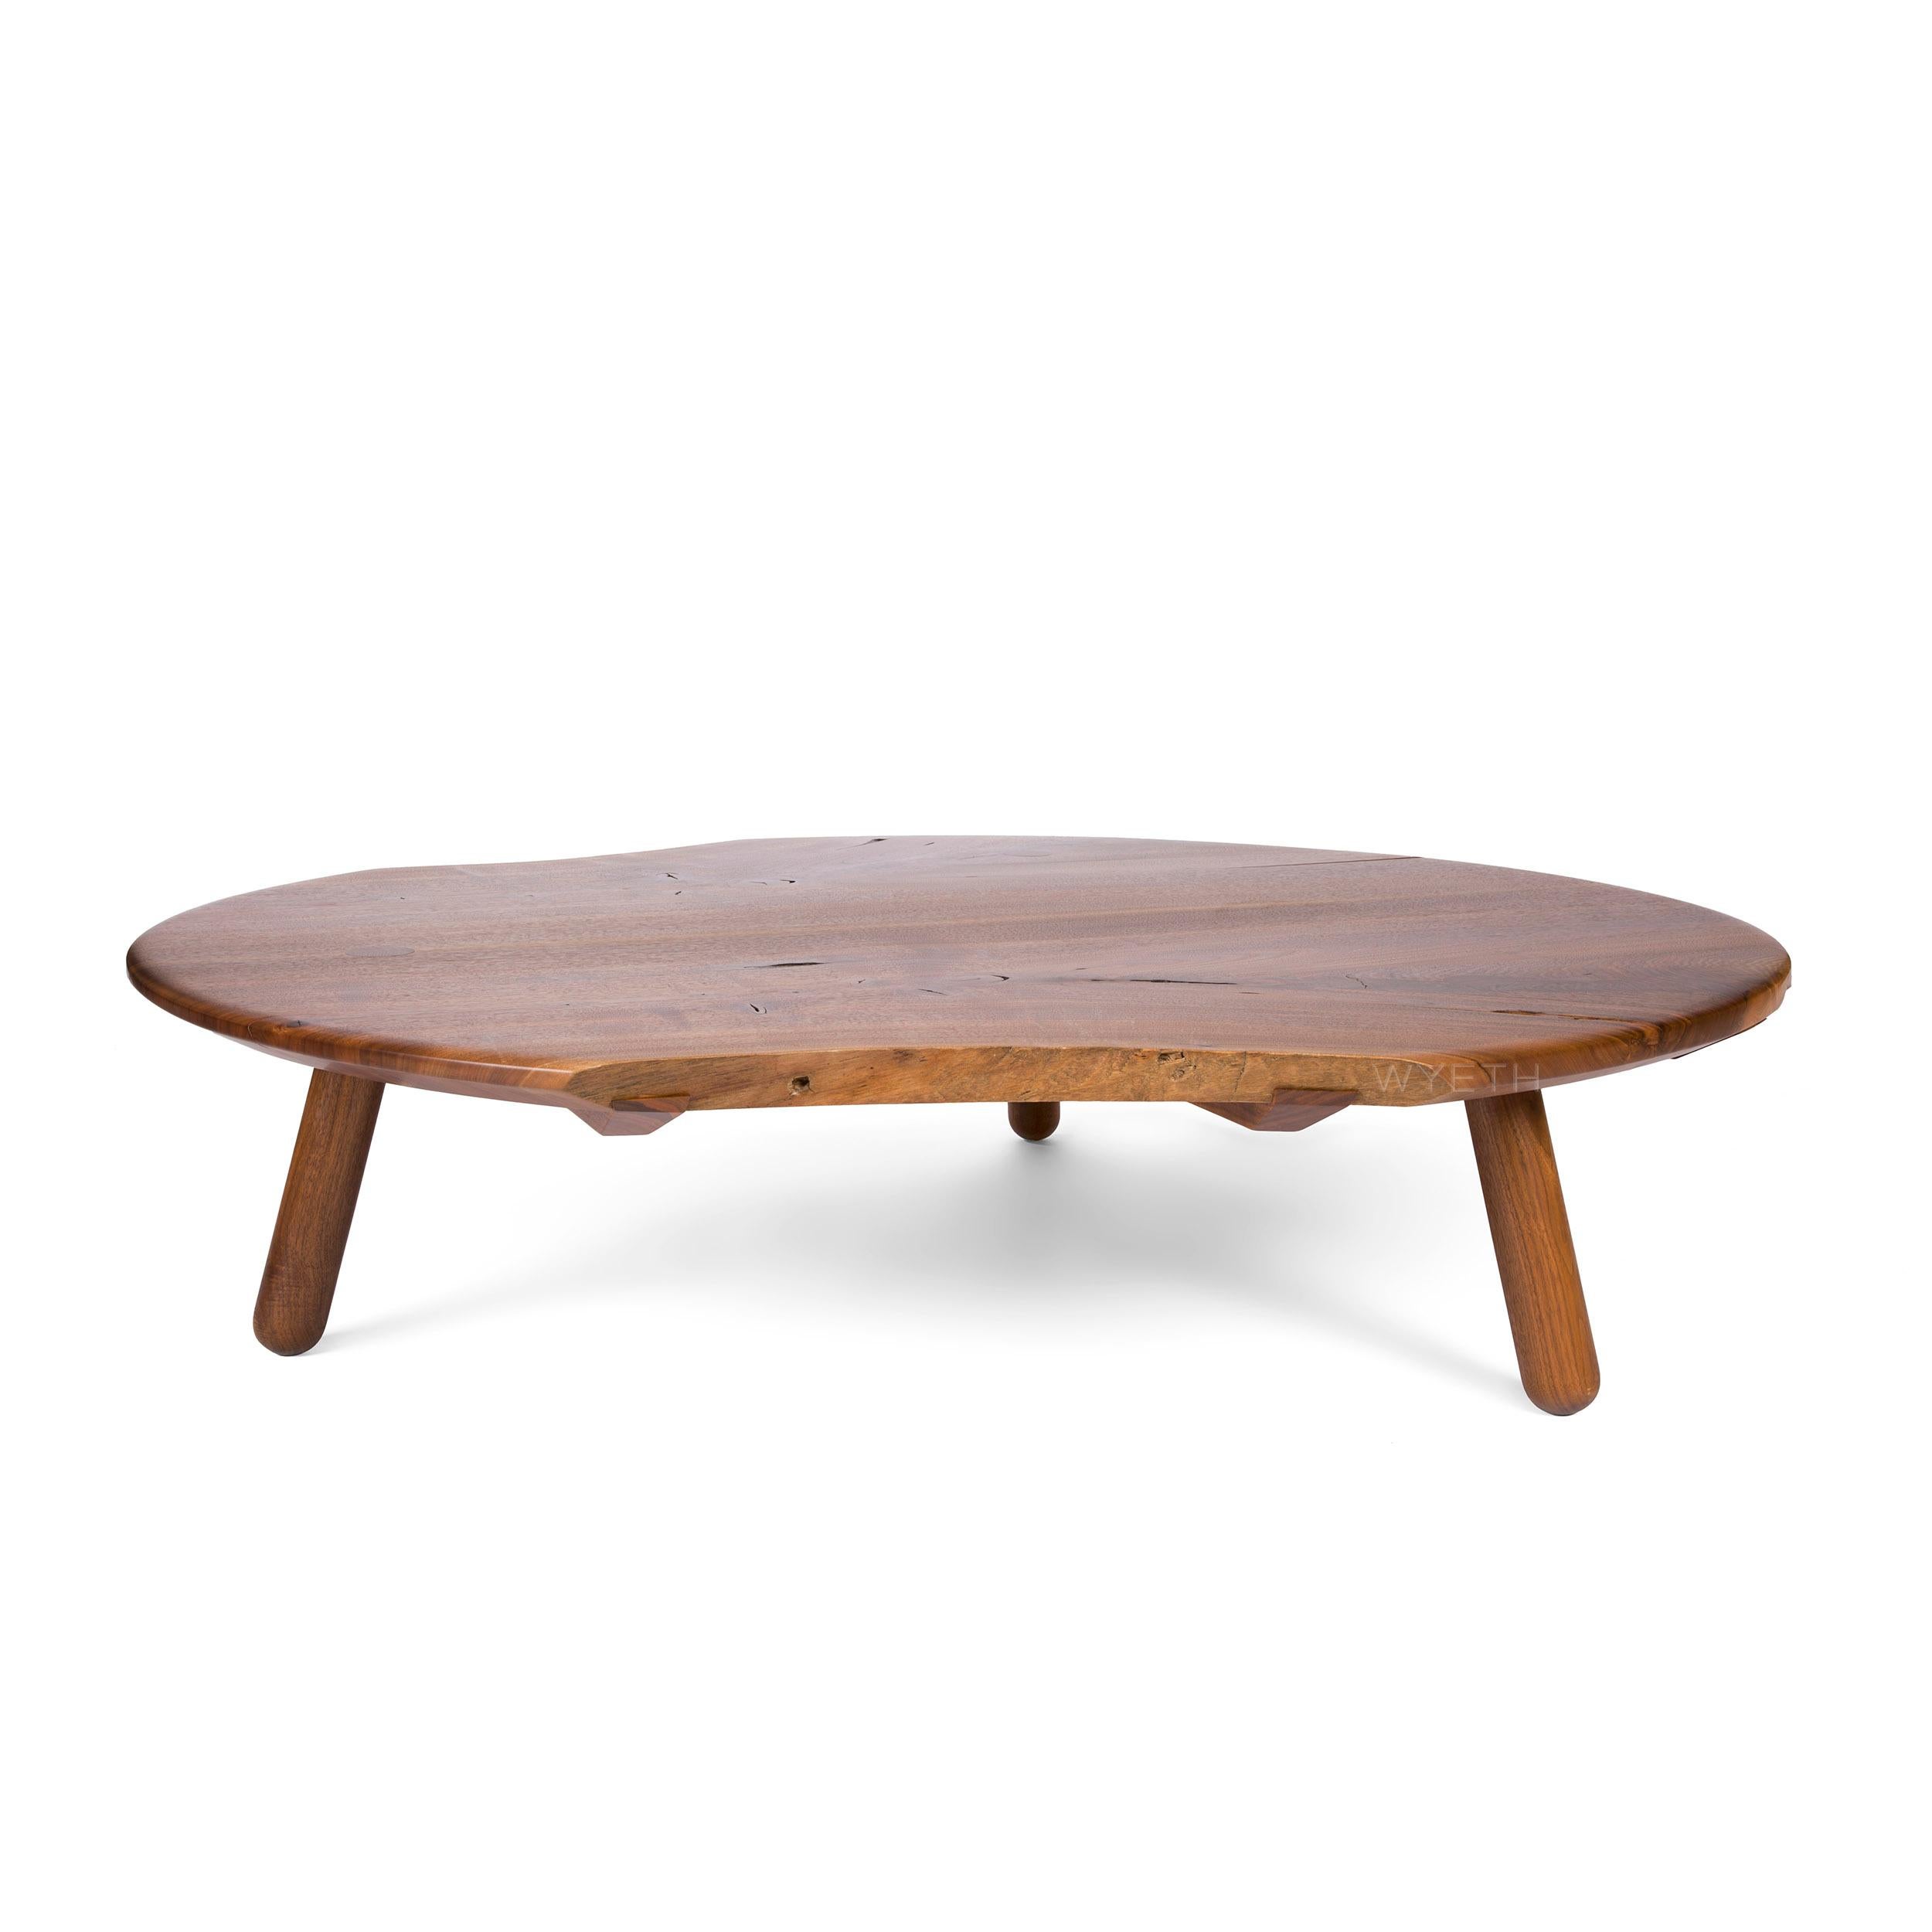 A handmade low table in walnut with a round form, natural edges when innate in the wood and three (3) substantial turned legs that are mortised through the top. The top consists of live edges, and solid boards joined together with sliding dovetail